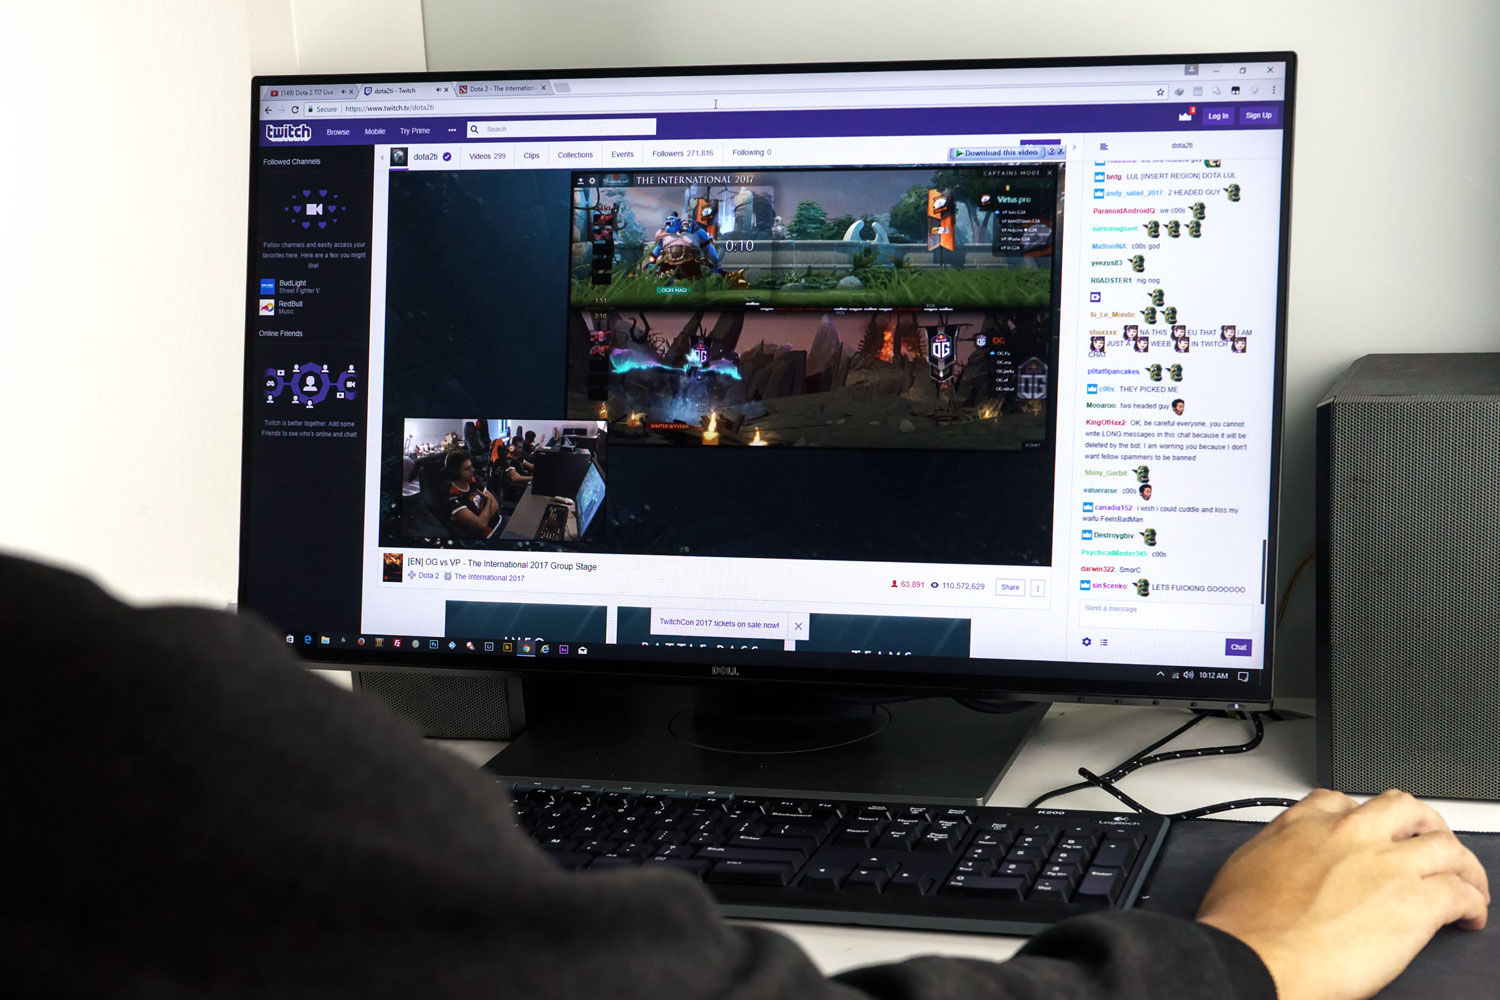 How To Record Twitch Streams for Later Viewing on a PC | Digital Trends